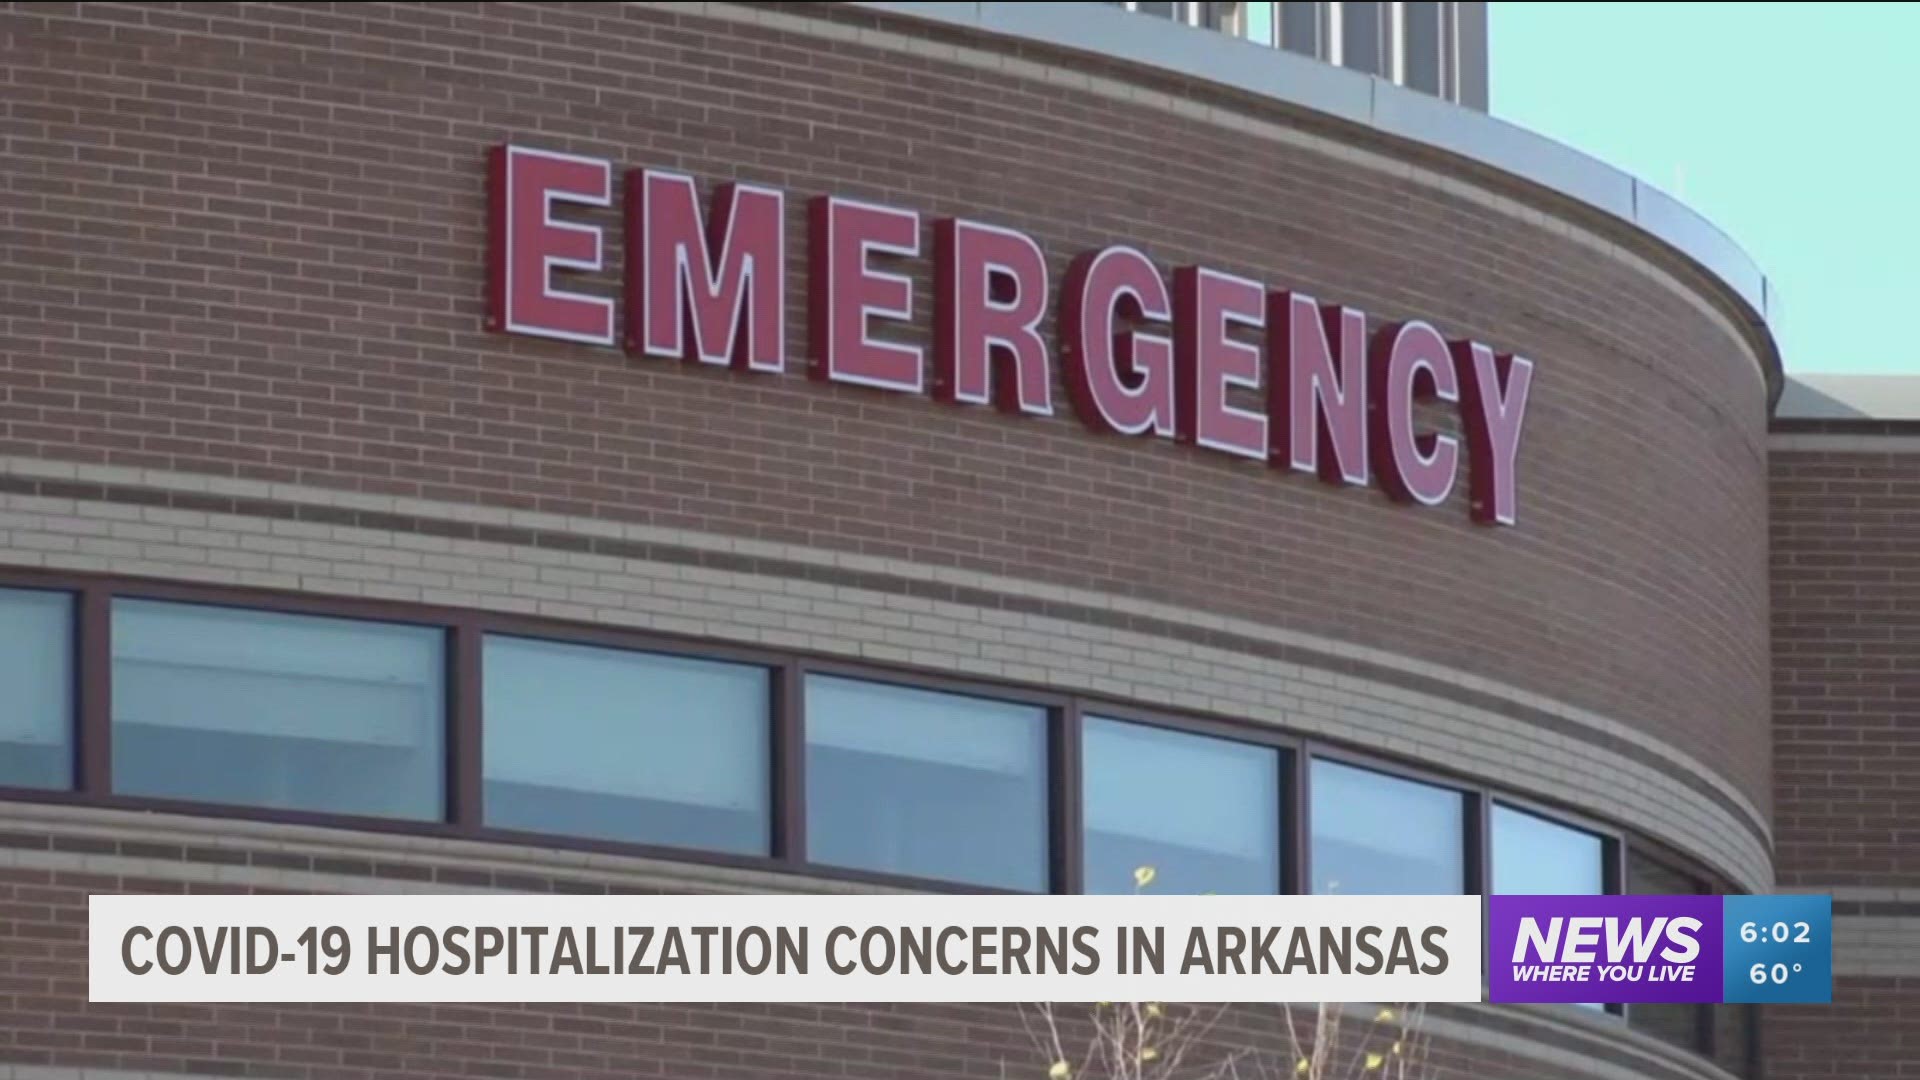 Hospitals in Northwest Arkansas are currently treating 117 patients in their COVID-19 units. https://bit.ly/3a7M8iK